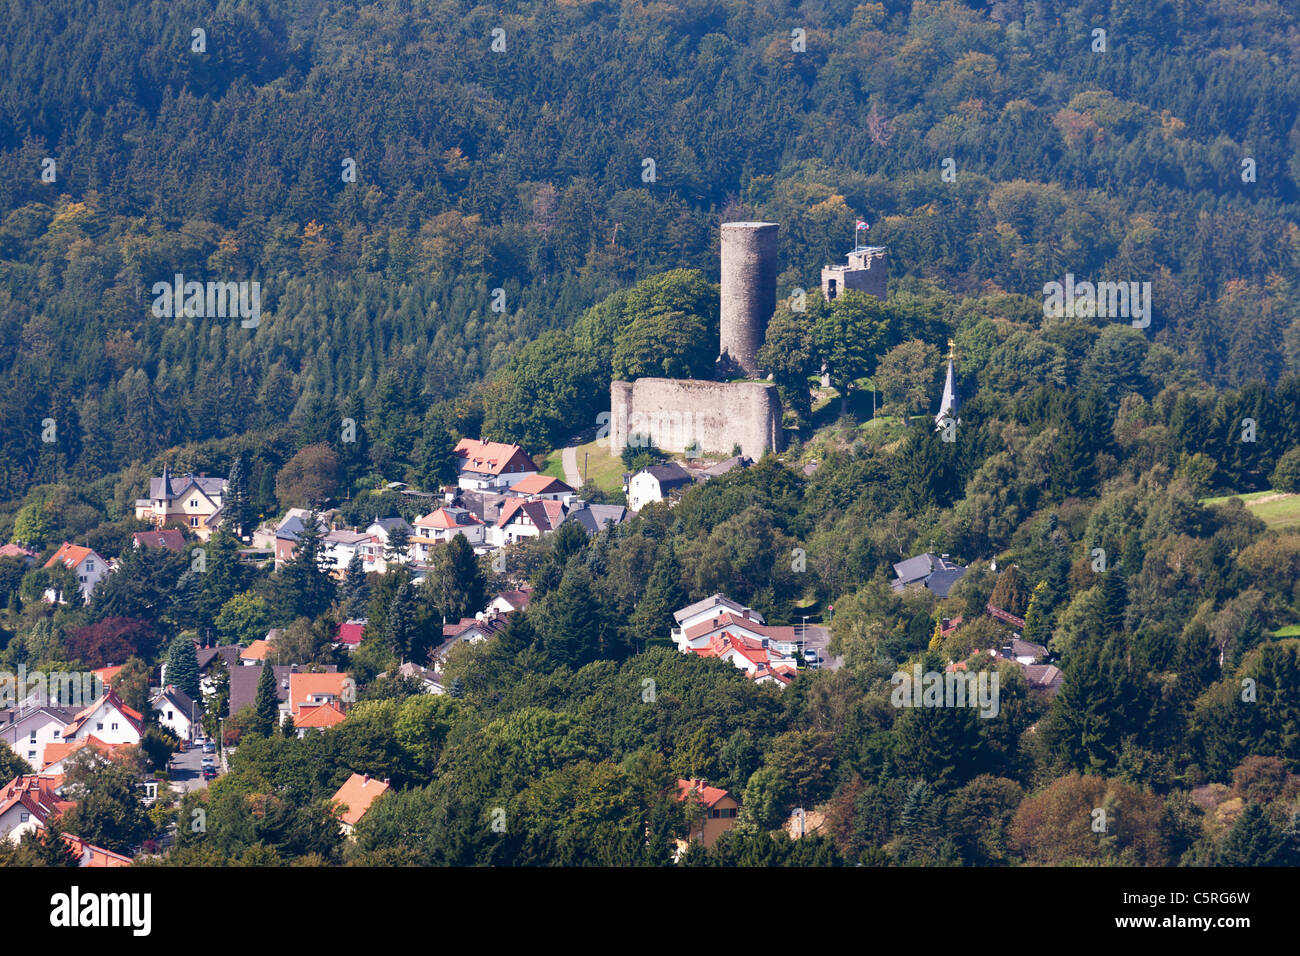 Europe, Germany, Hesse, Frankfurt, View of village and castle Stock Photo